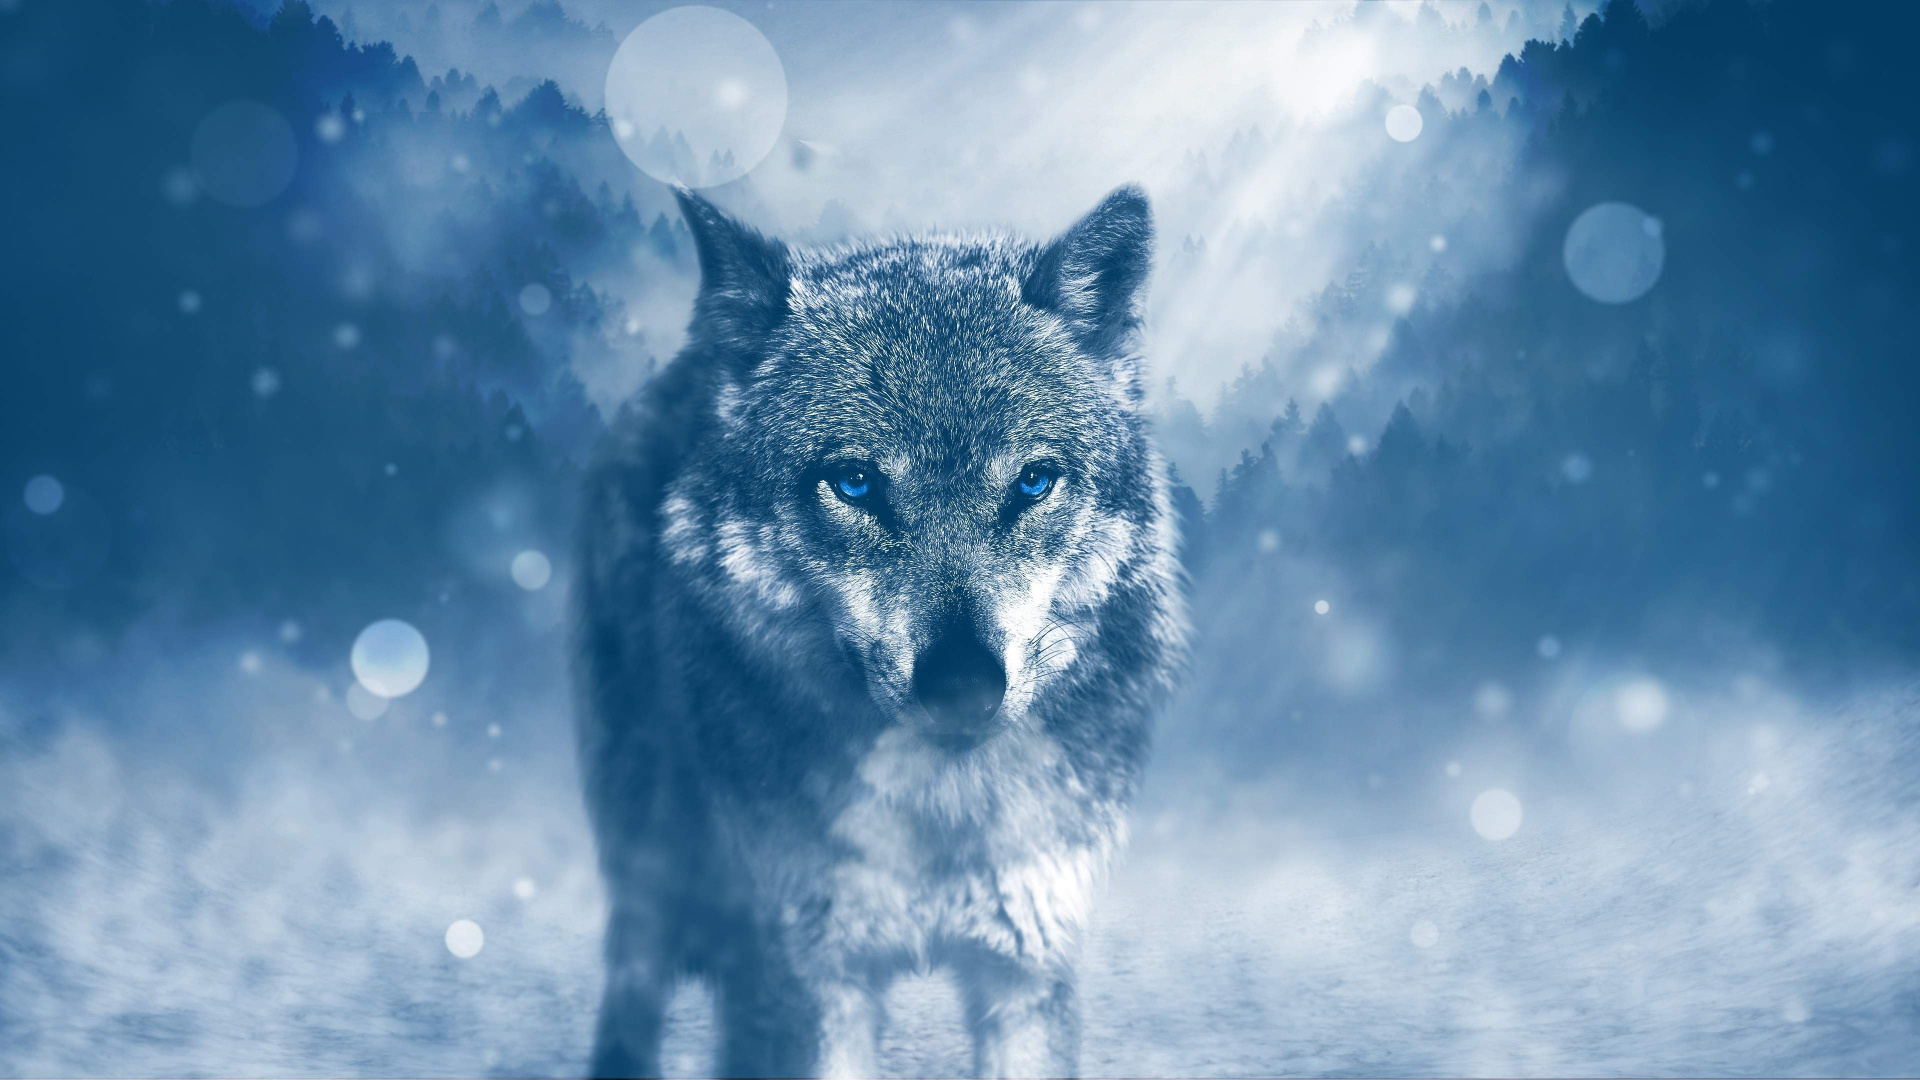 Gray Wolf on Snow Covered Ground. Wallpaper in 1920x1080 Resolution